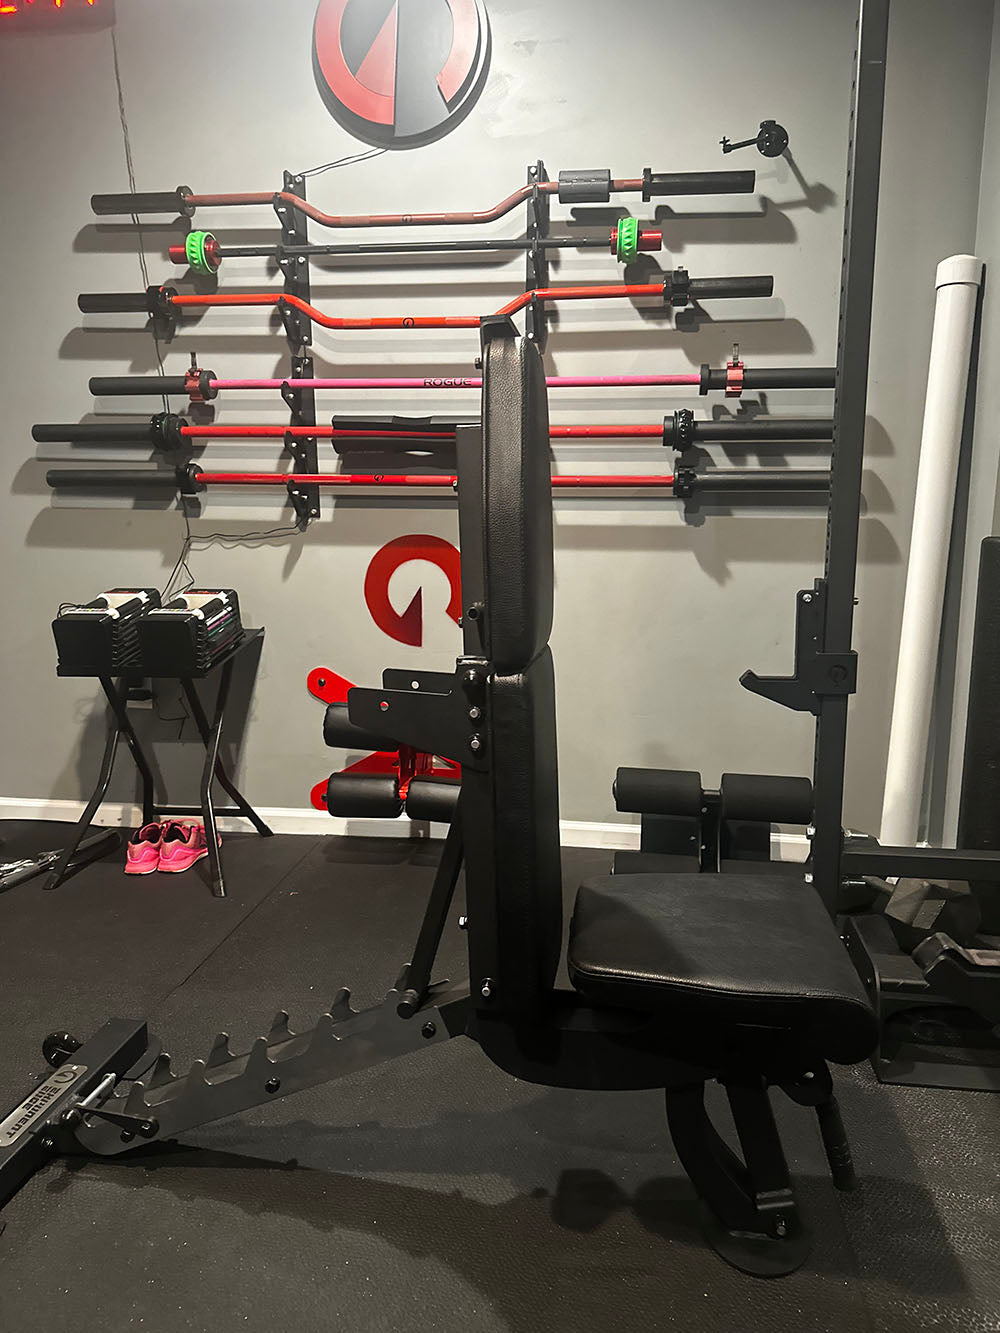 The Edge Infinity Bench is a bench that combines three separate benches all into one bench. You get the benefits of a flat bench, incline bench, and half bench all in one device. This image presents the bench from a side view with the back support fully vertical.